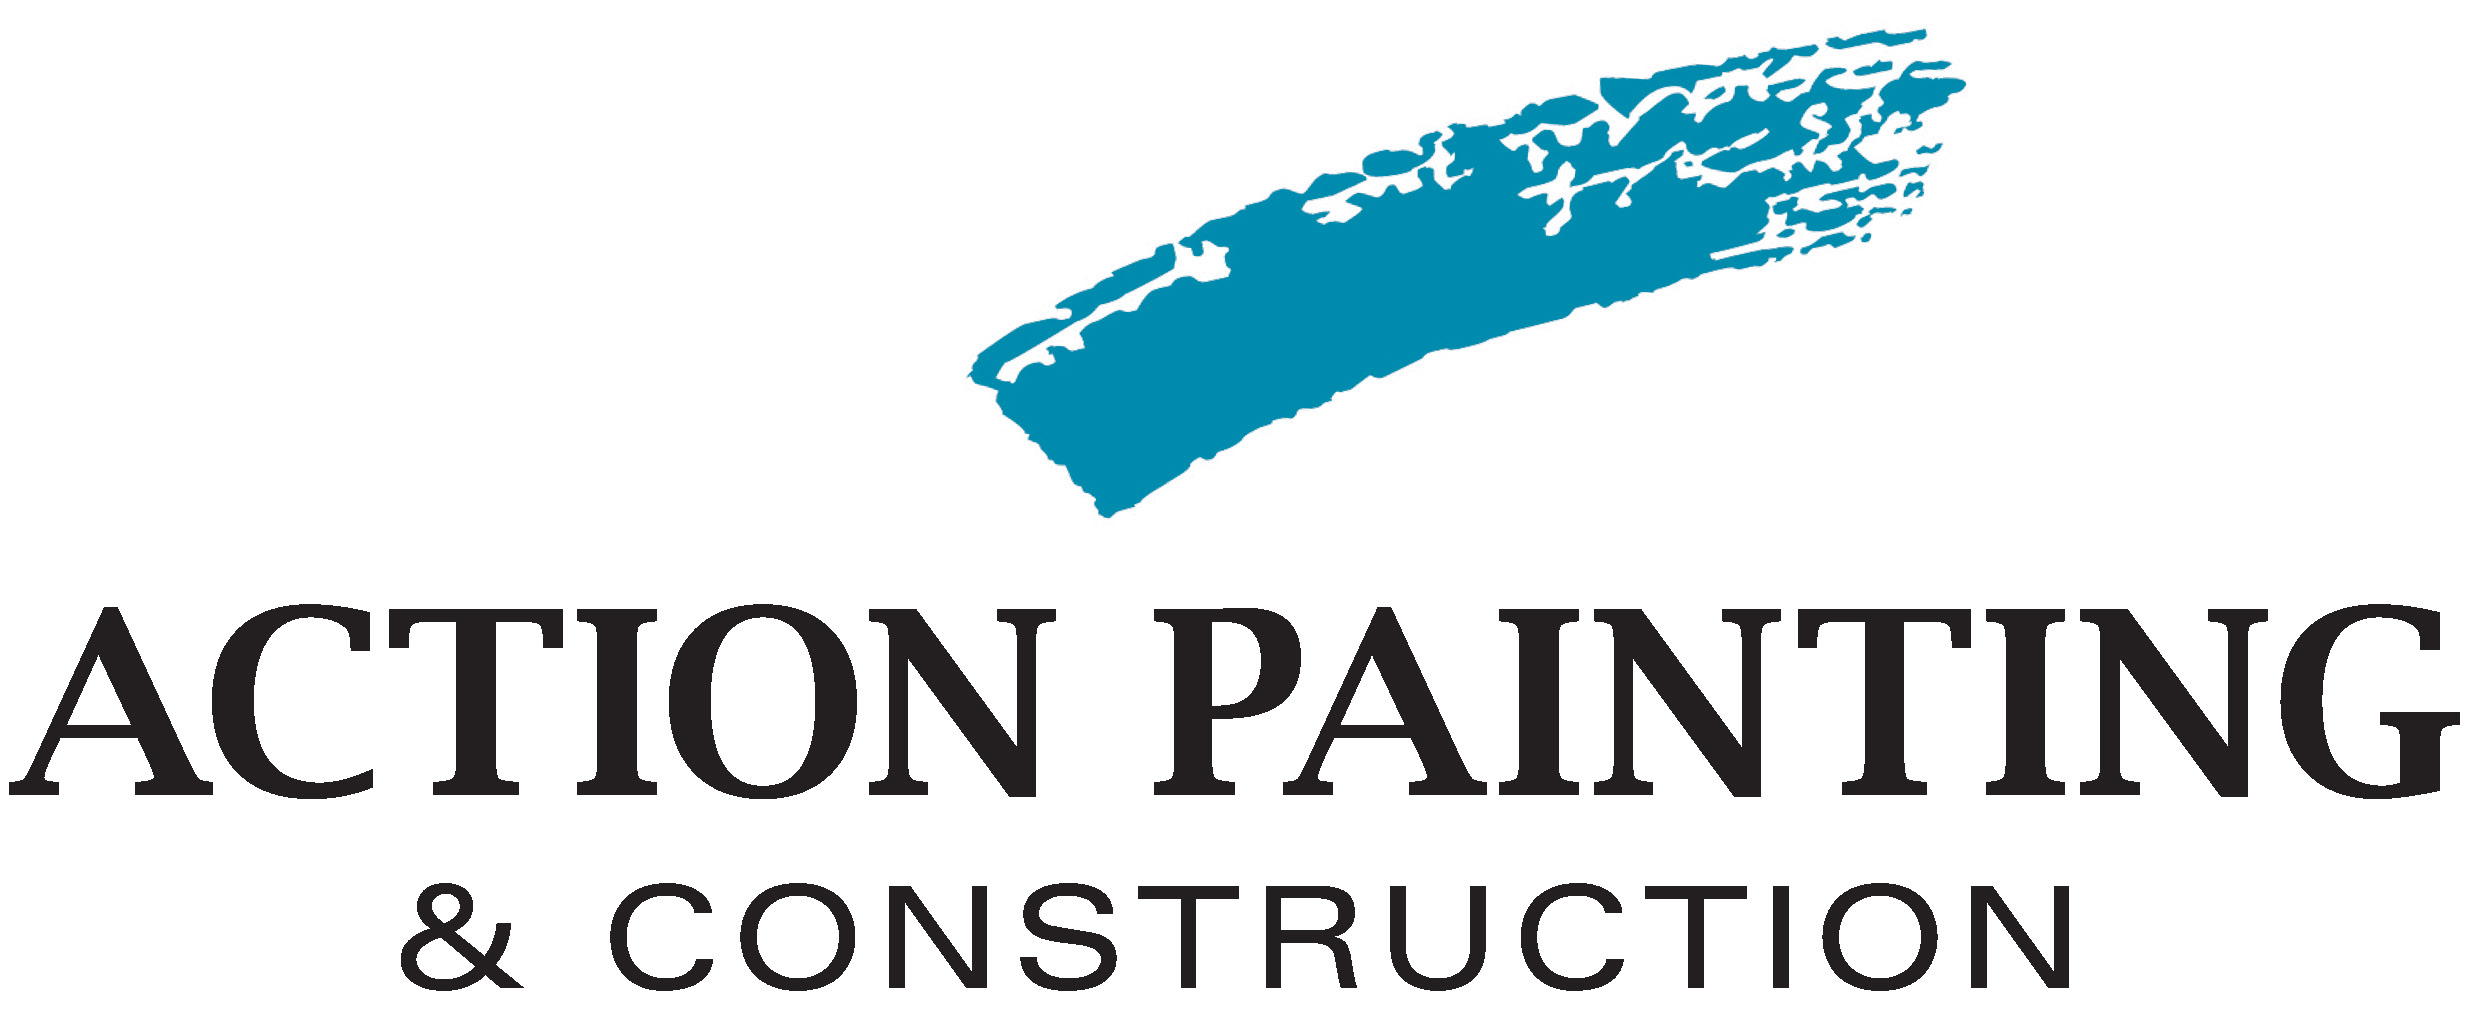 Action Painting & Construction